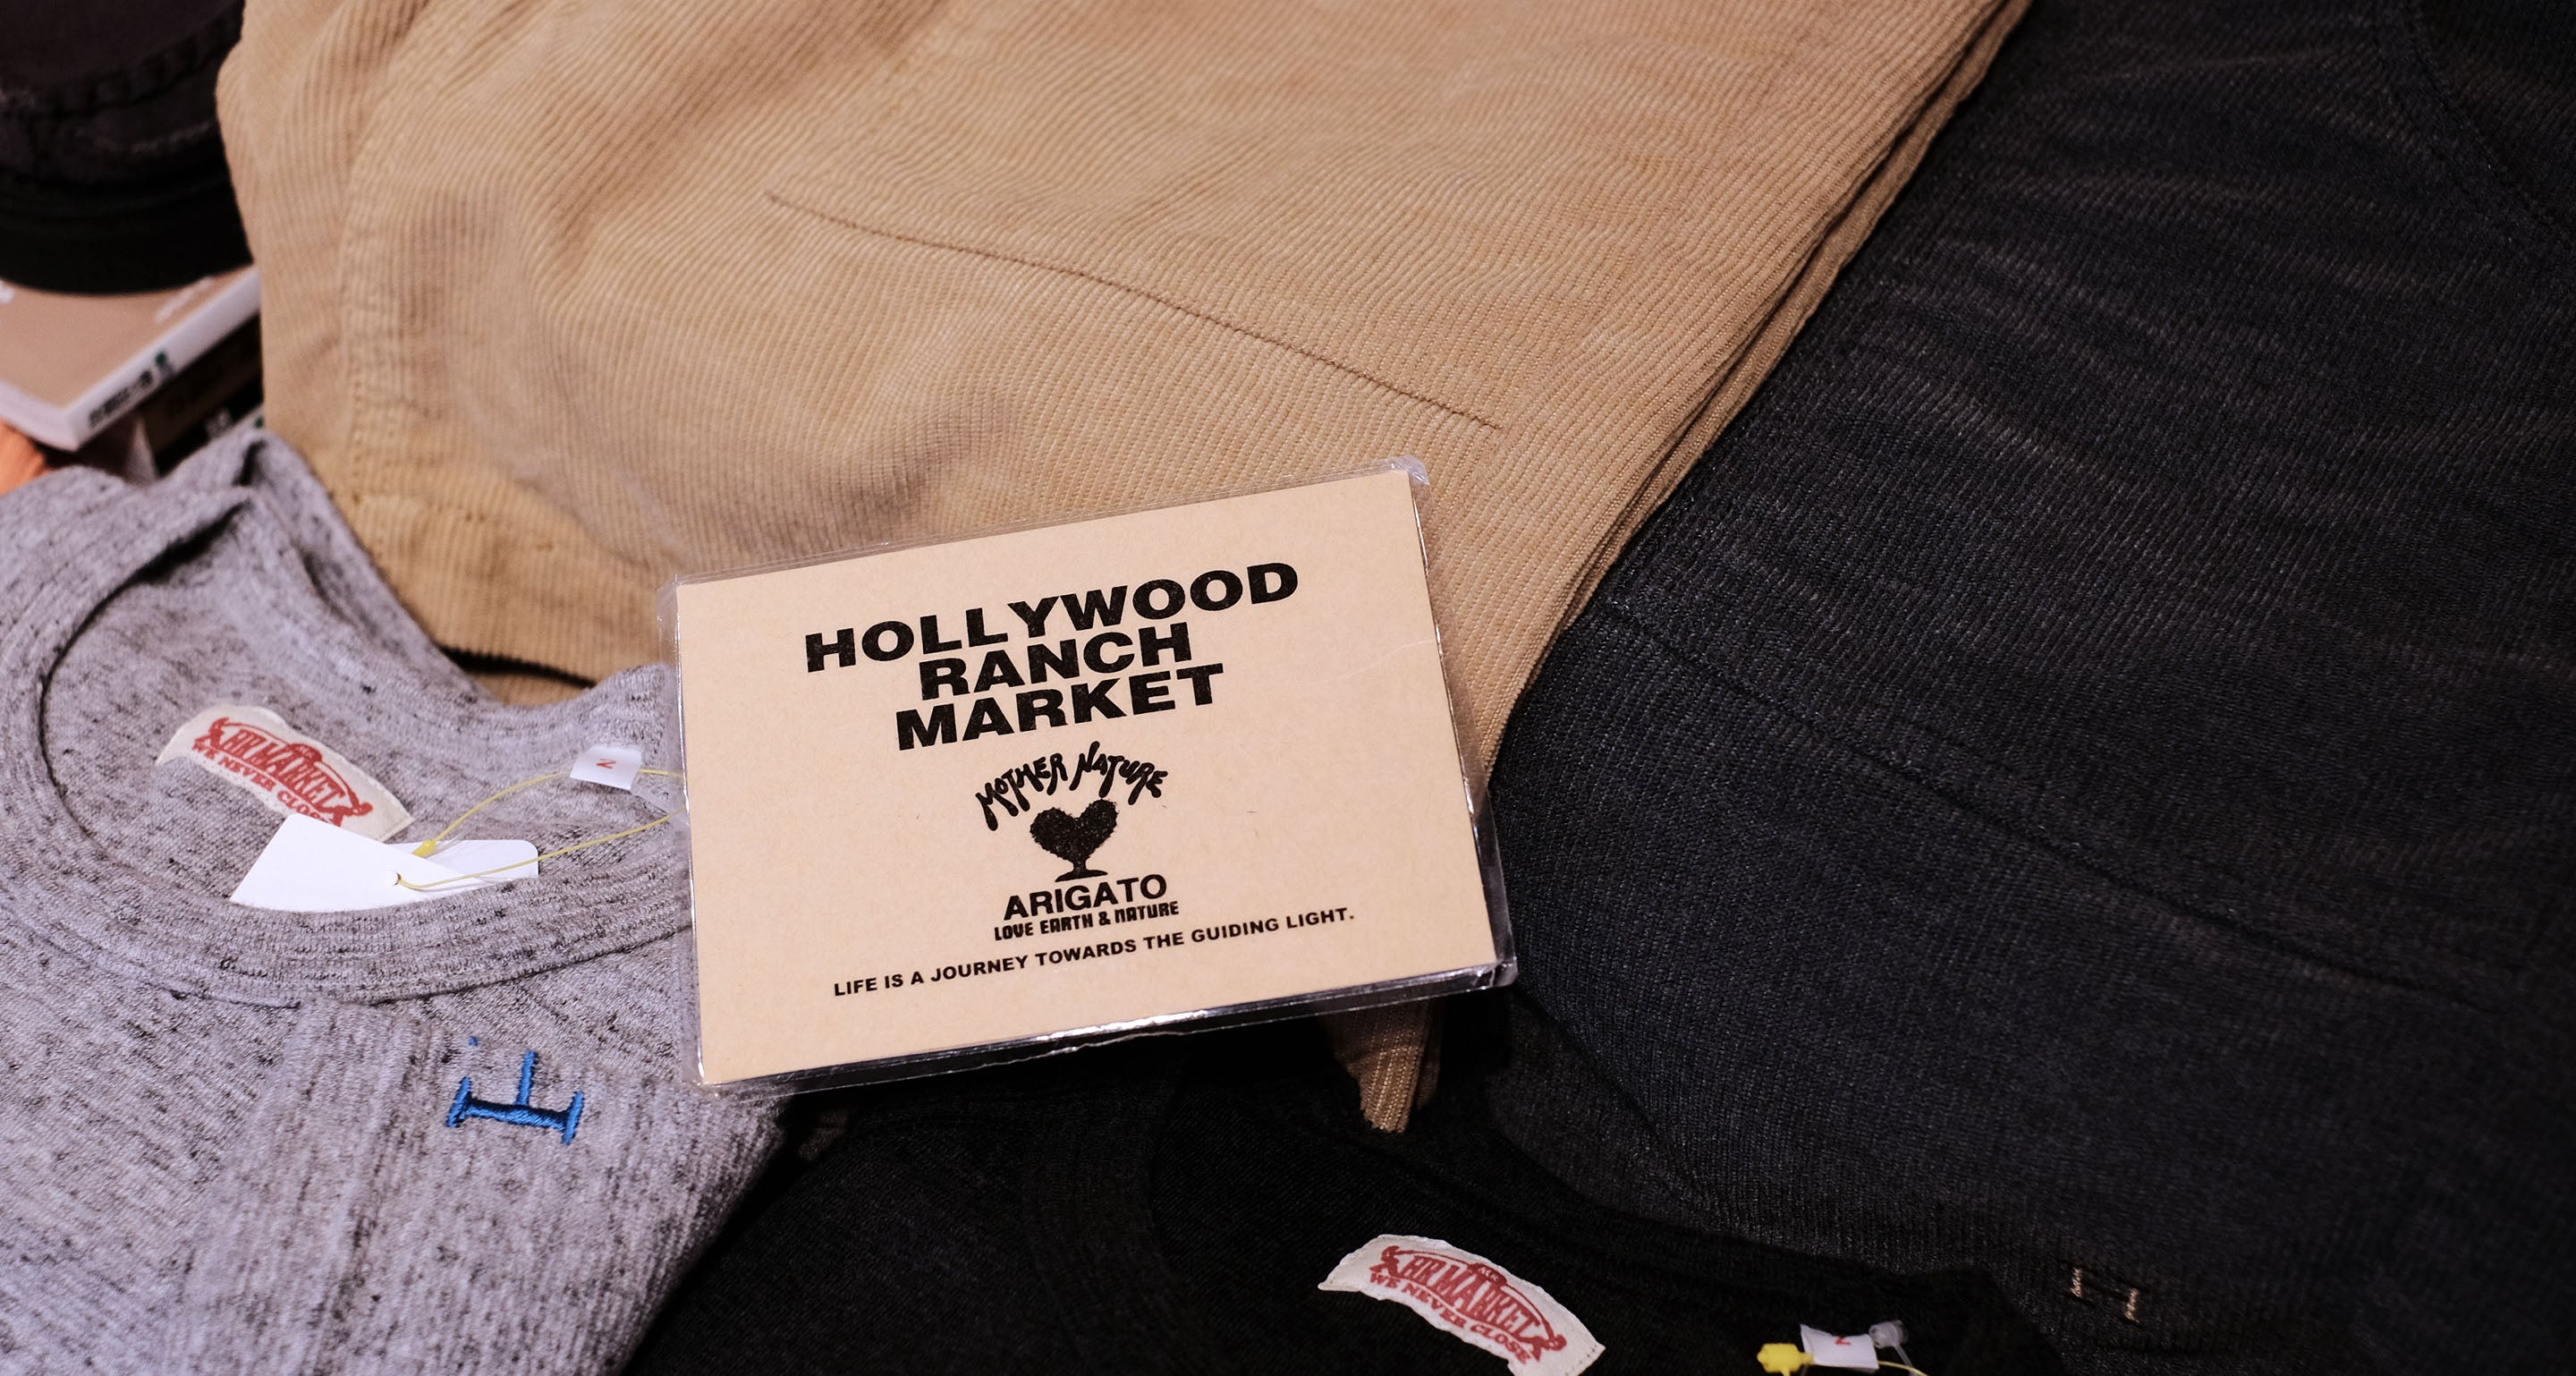 HOLLYWOOD RANCH MARKET – Sun House Online Store 〜 サンハウス